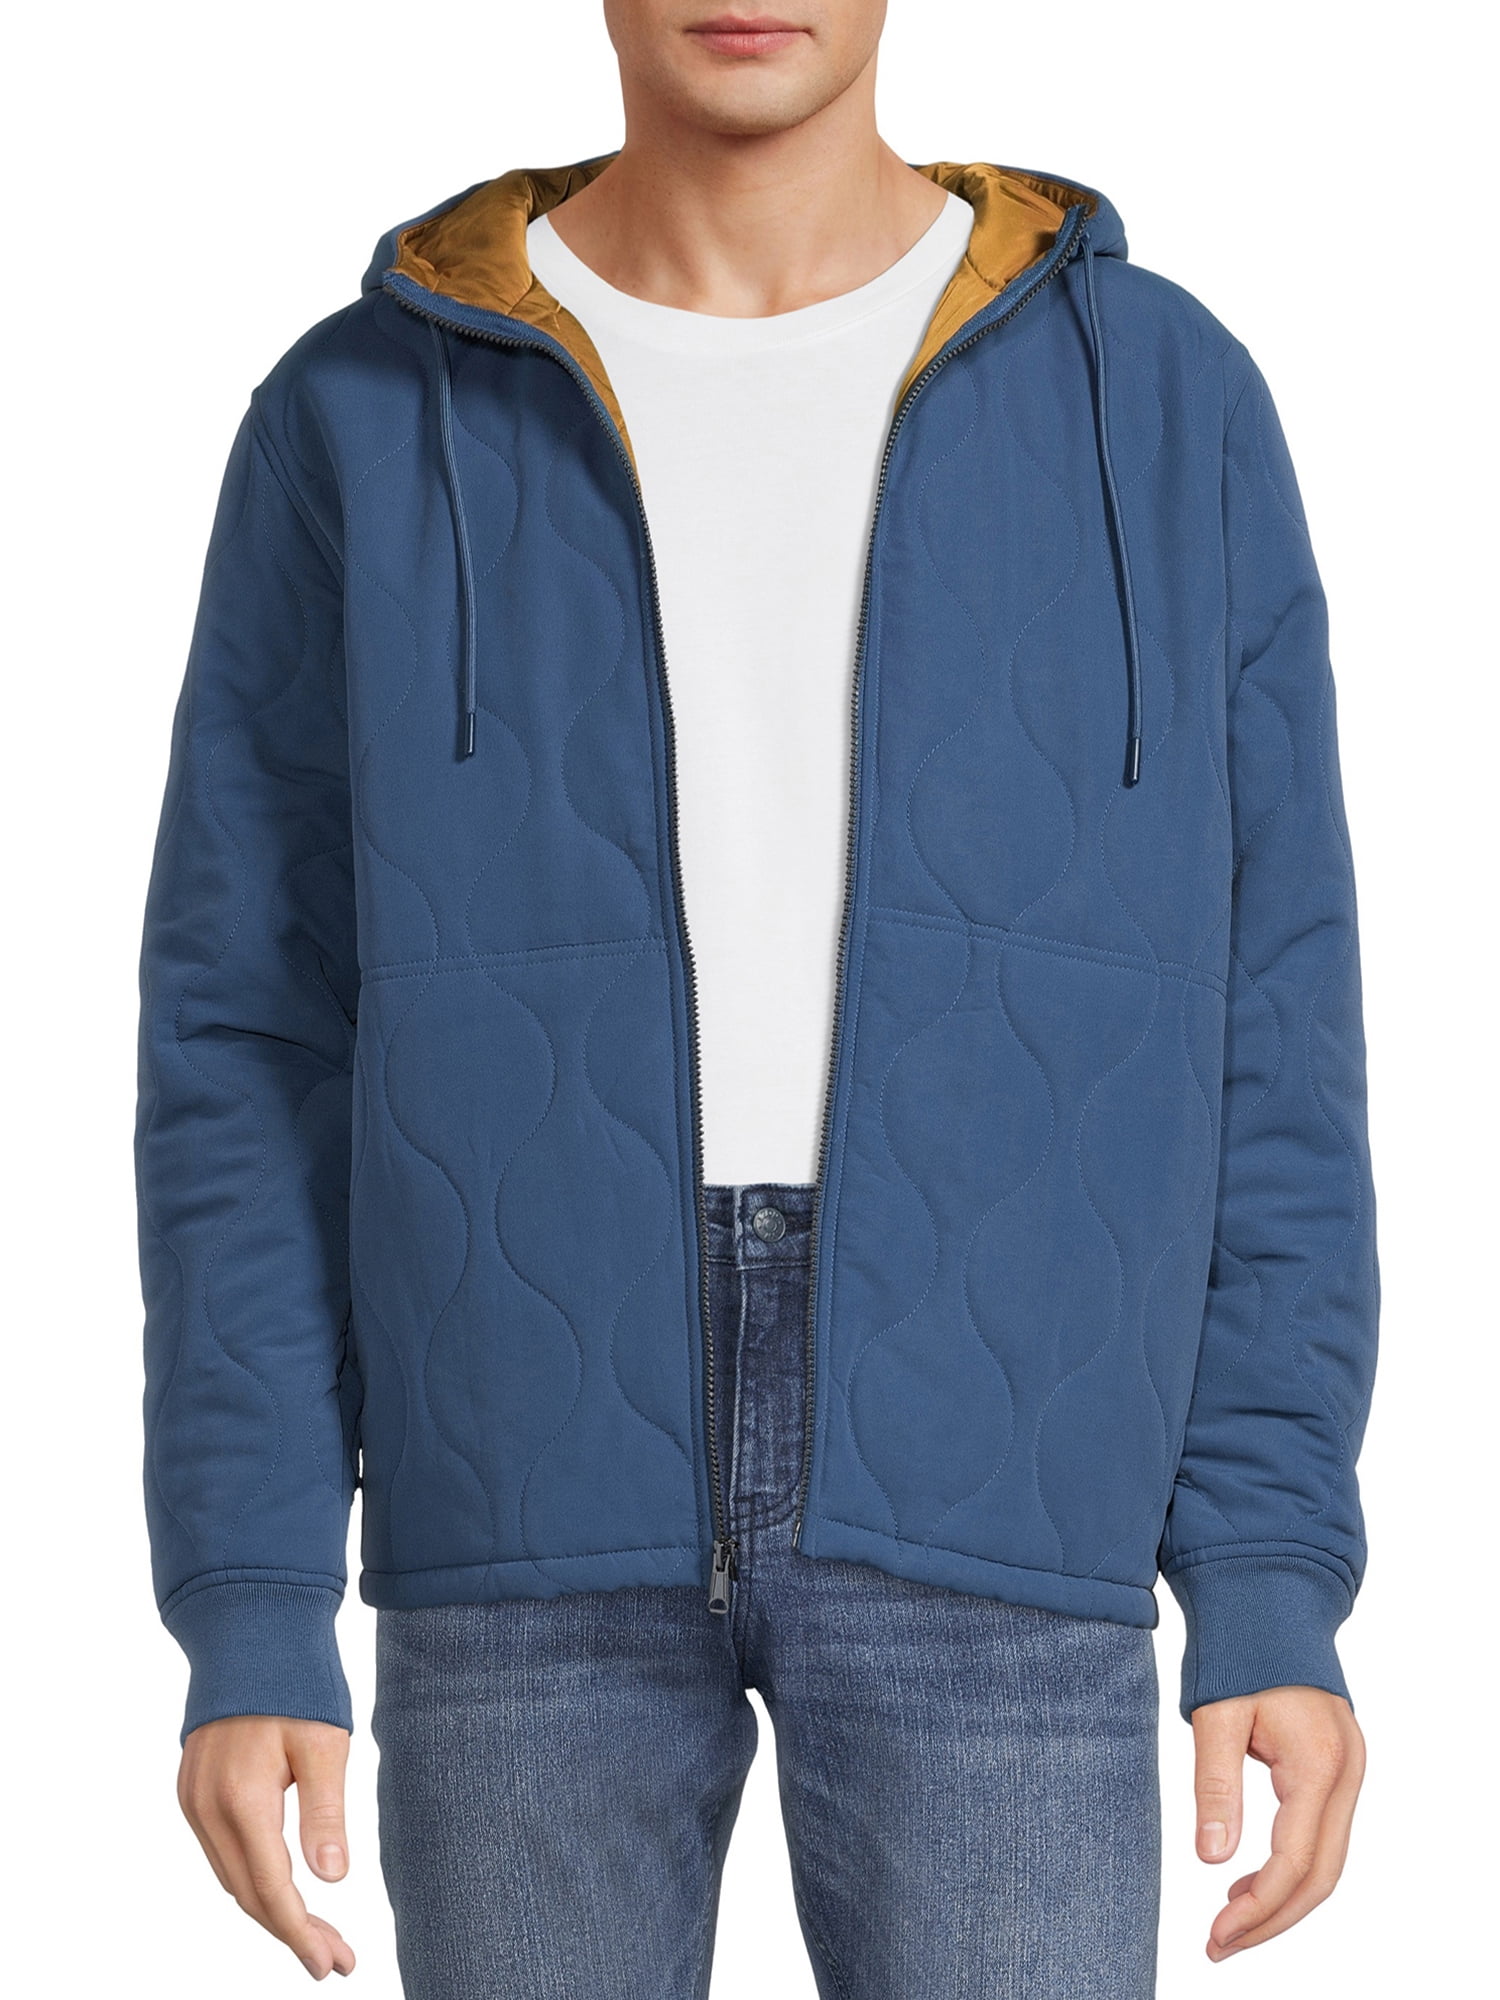 Swiss Tech Men's Quilted Jacket with Hood